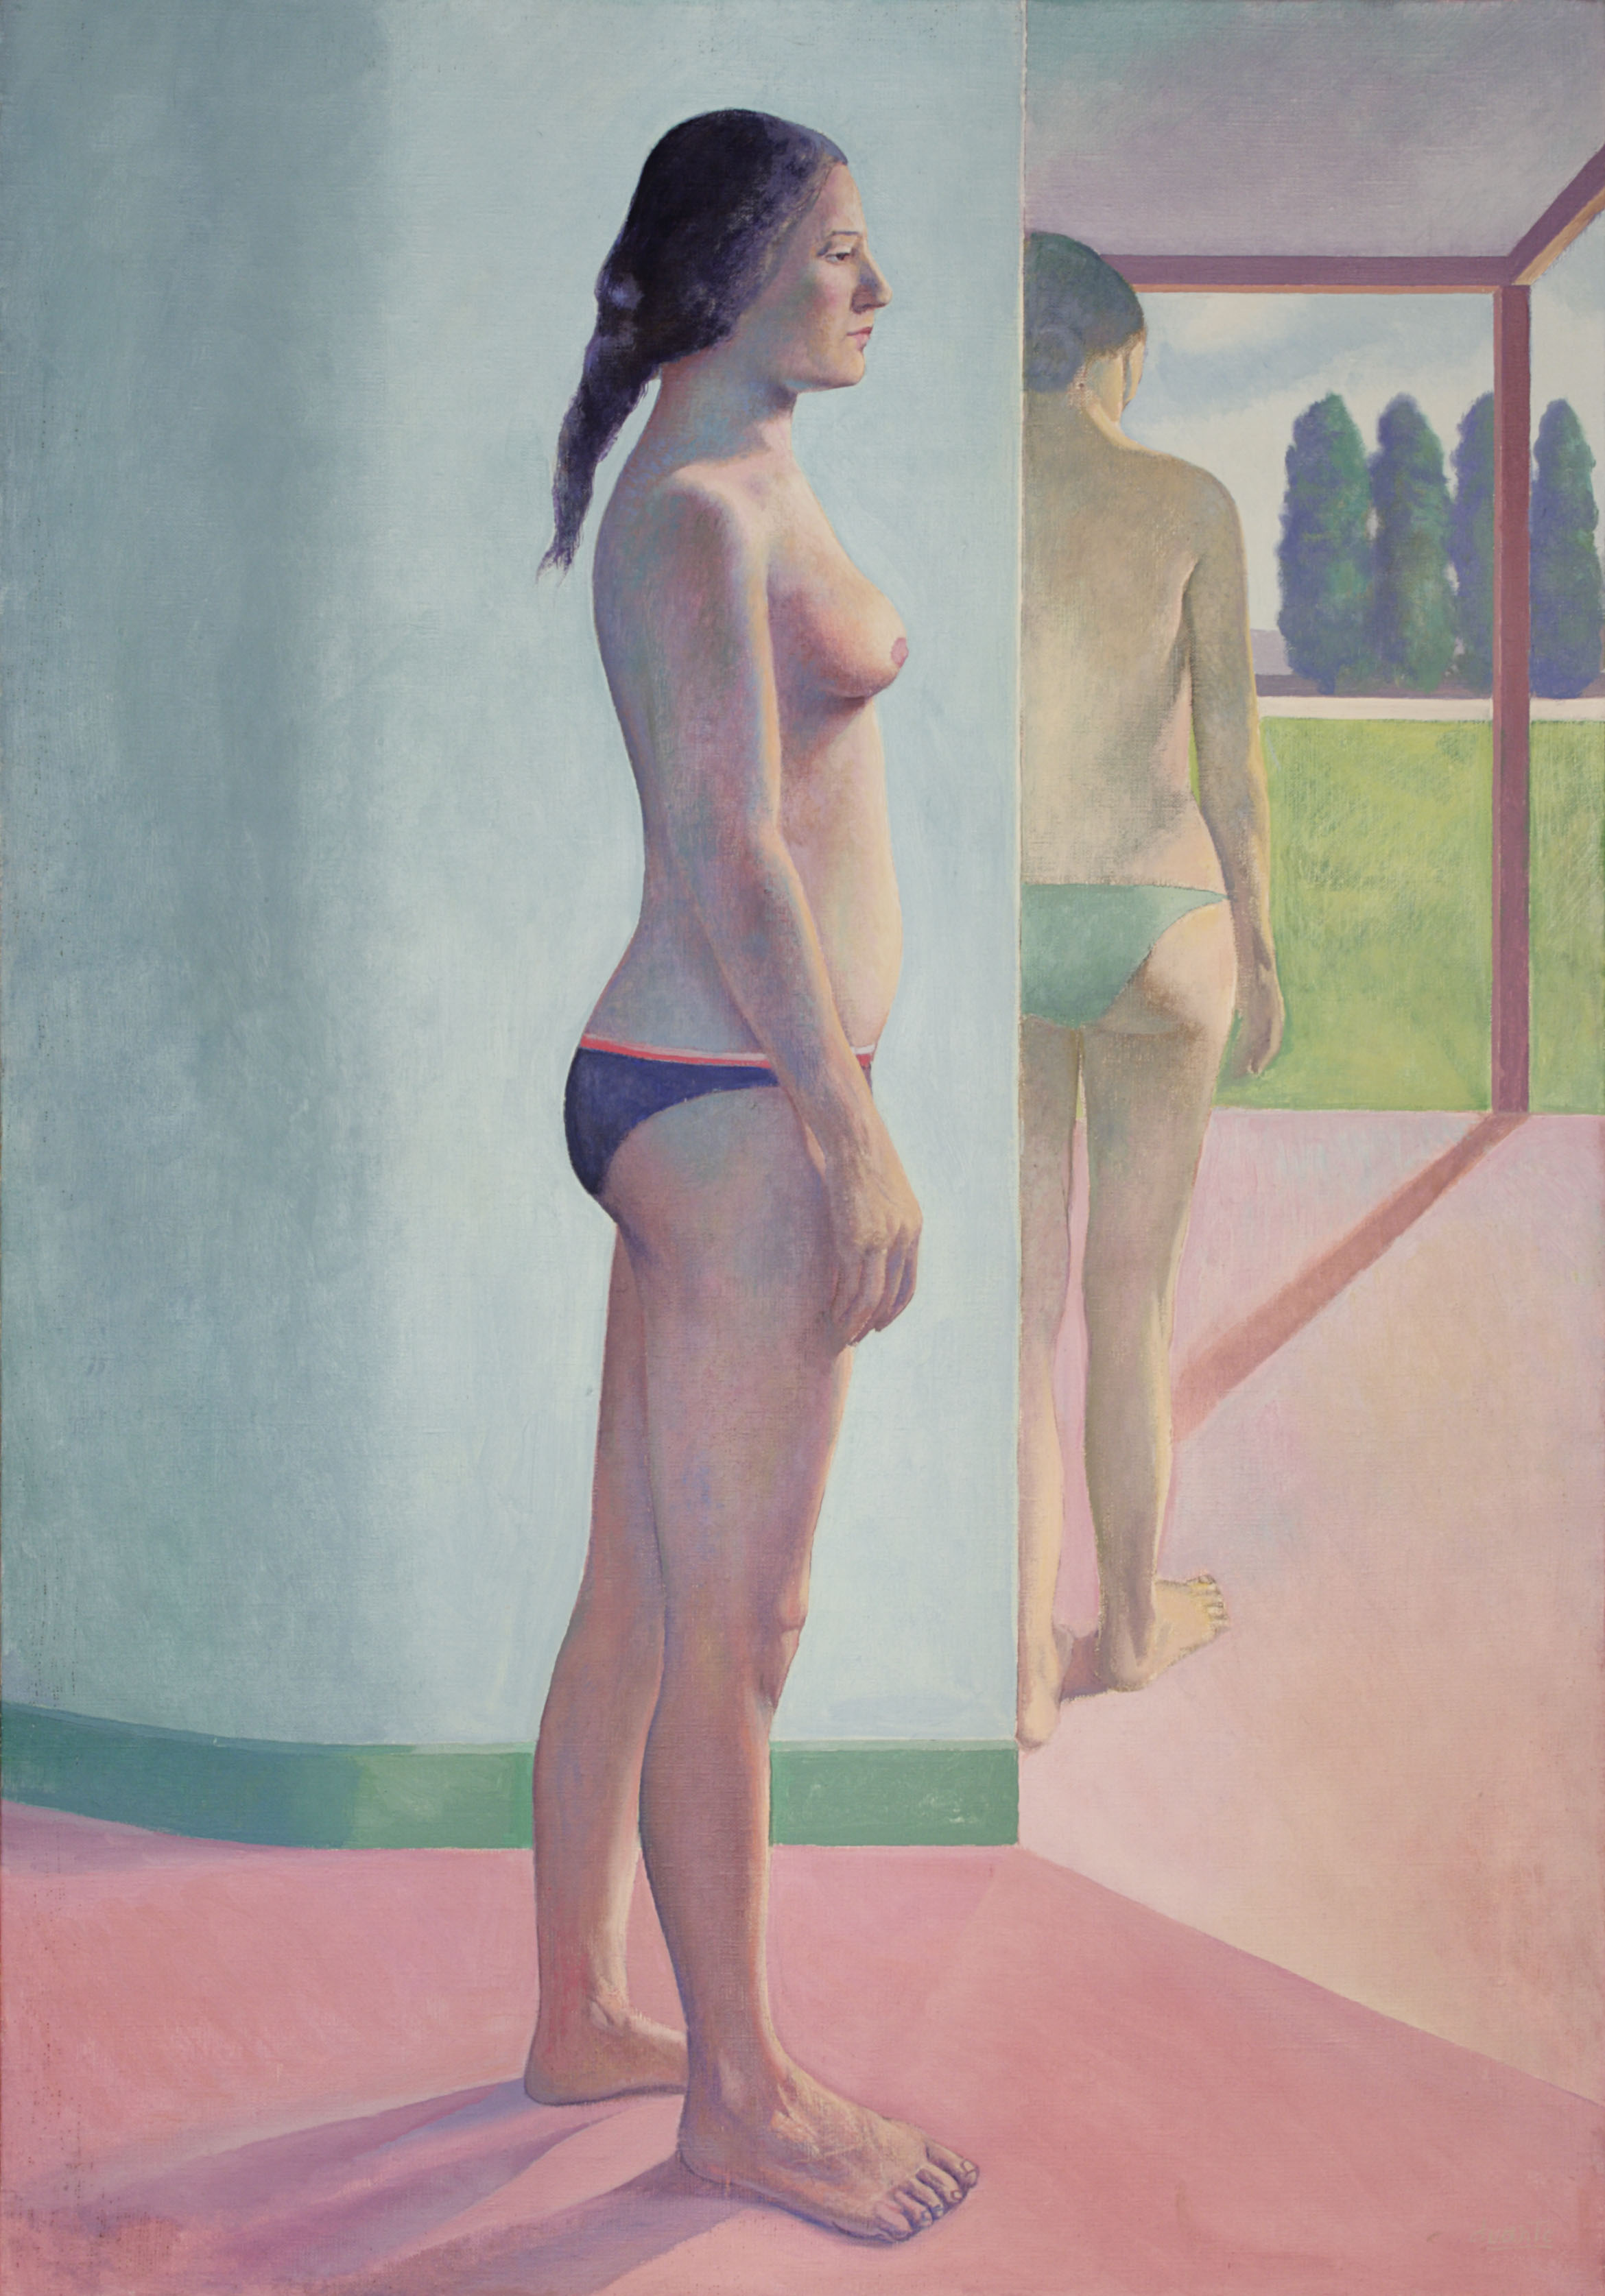 Untitled. 1981. Oil on canvas. 117 x 81 cm.